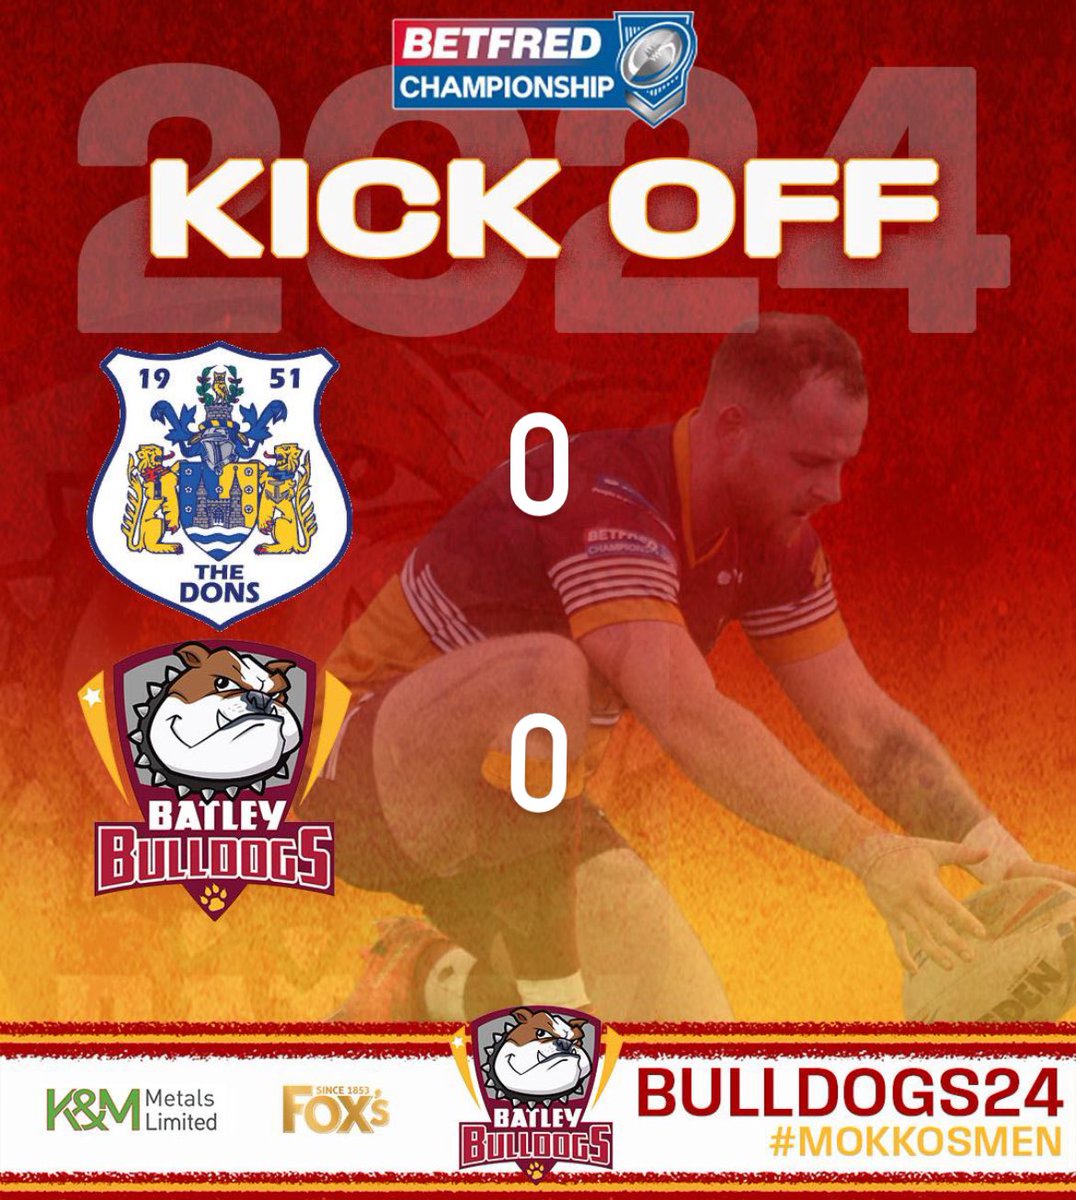 KICK OFF | Doncaster get the game underway and the ball goes dead in goal for a GLDO. 🔵 0 🐶 0 #COYD #UTD 🐶